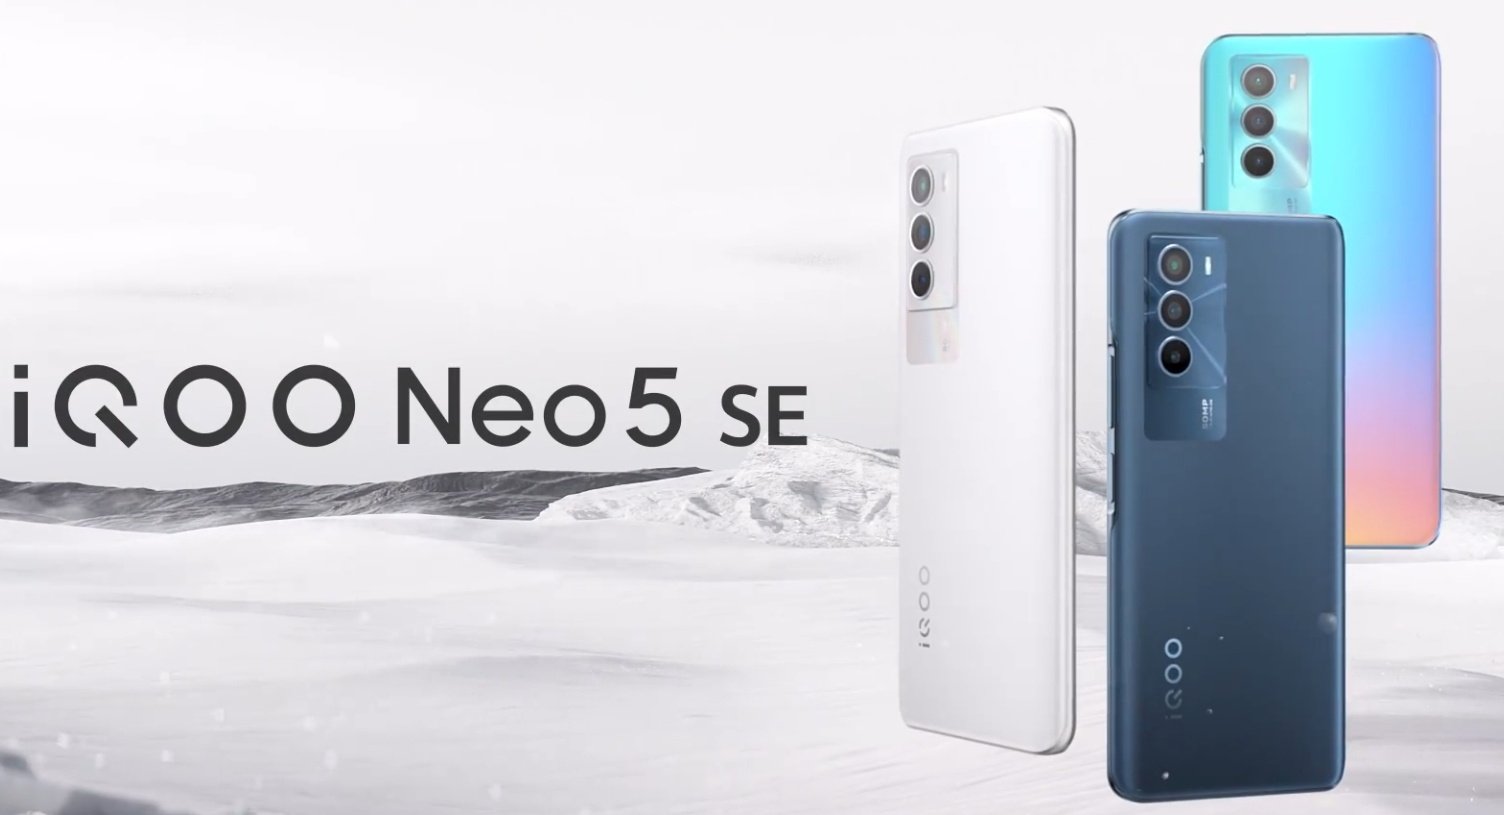 iQOO Neo 5 SE Gets Announcement Date - Snapdragon 778G +, 50MP Camera, AMOLED Screen And 66W Charging